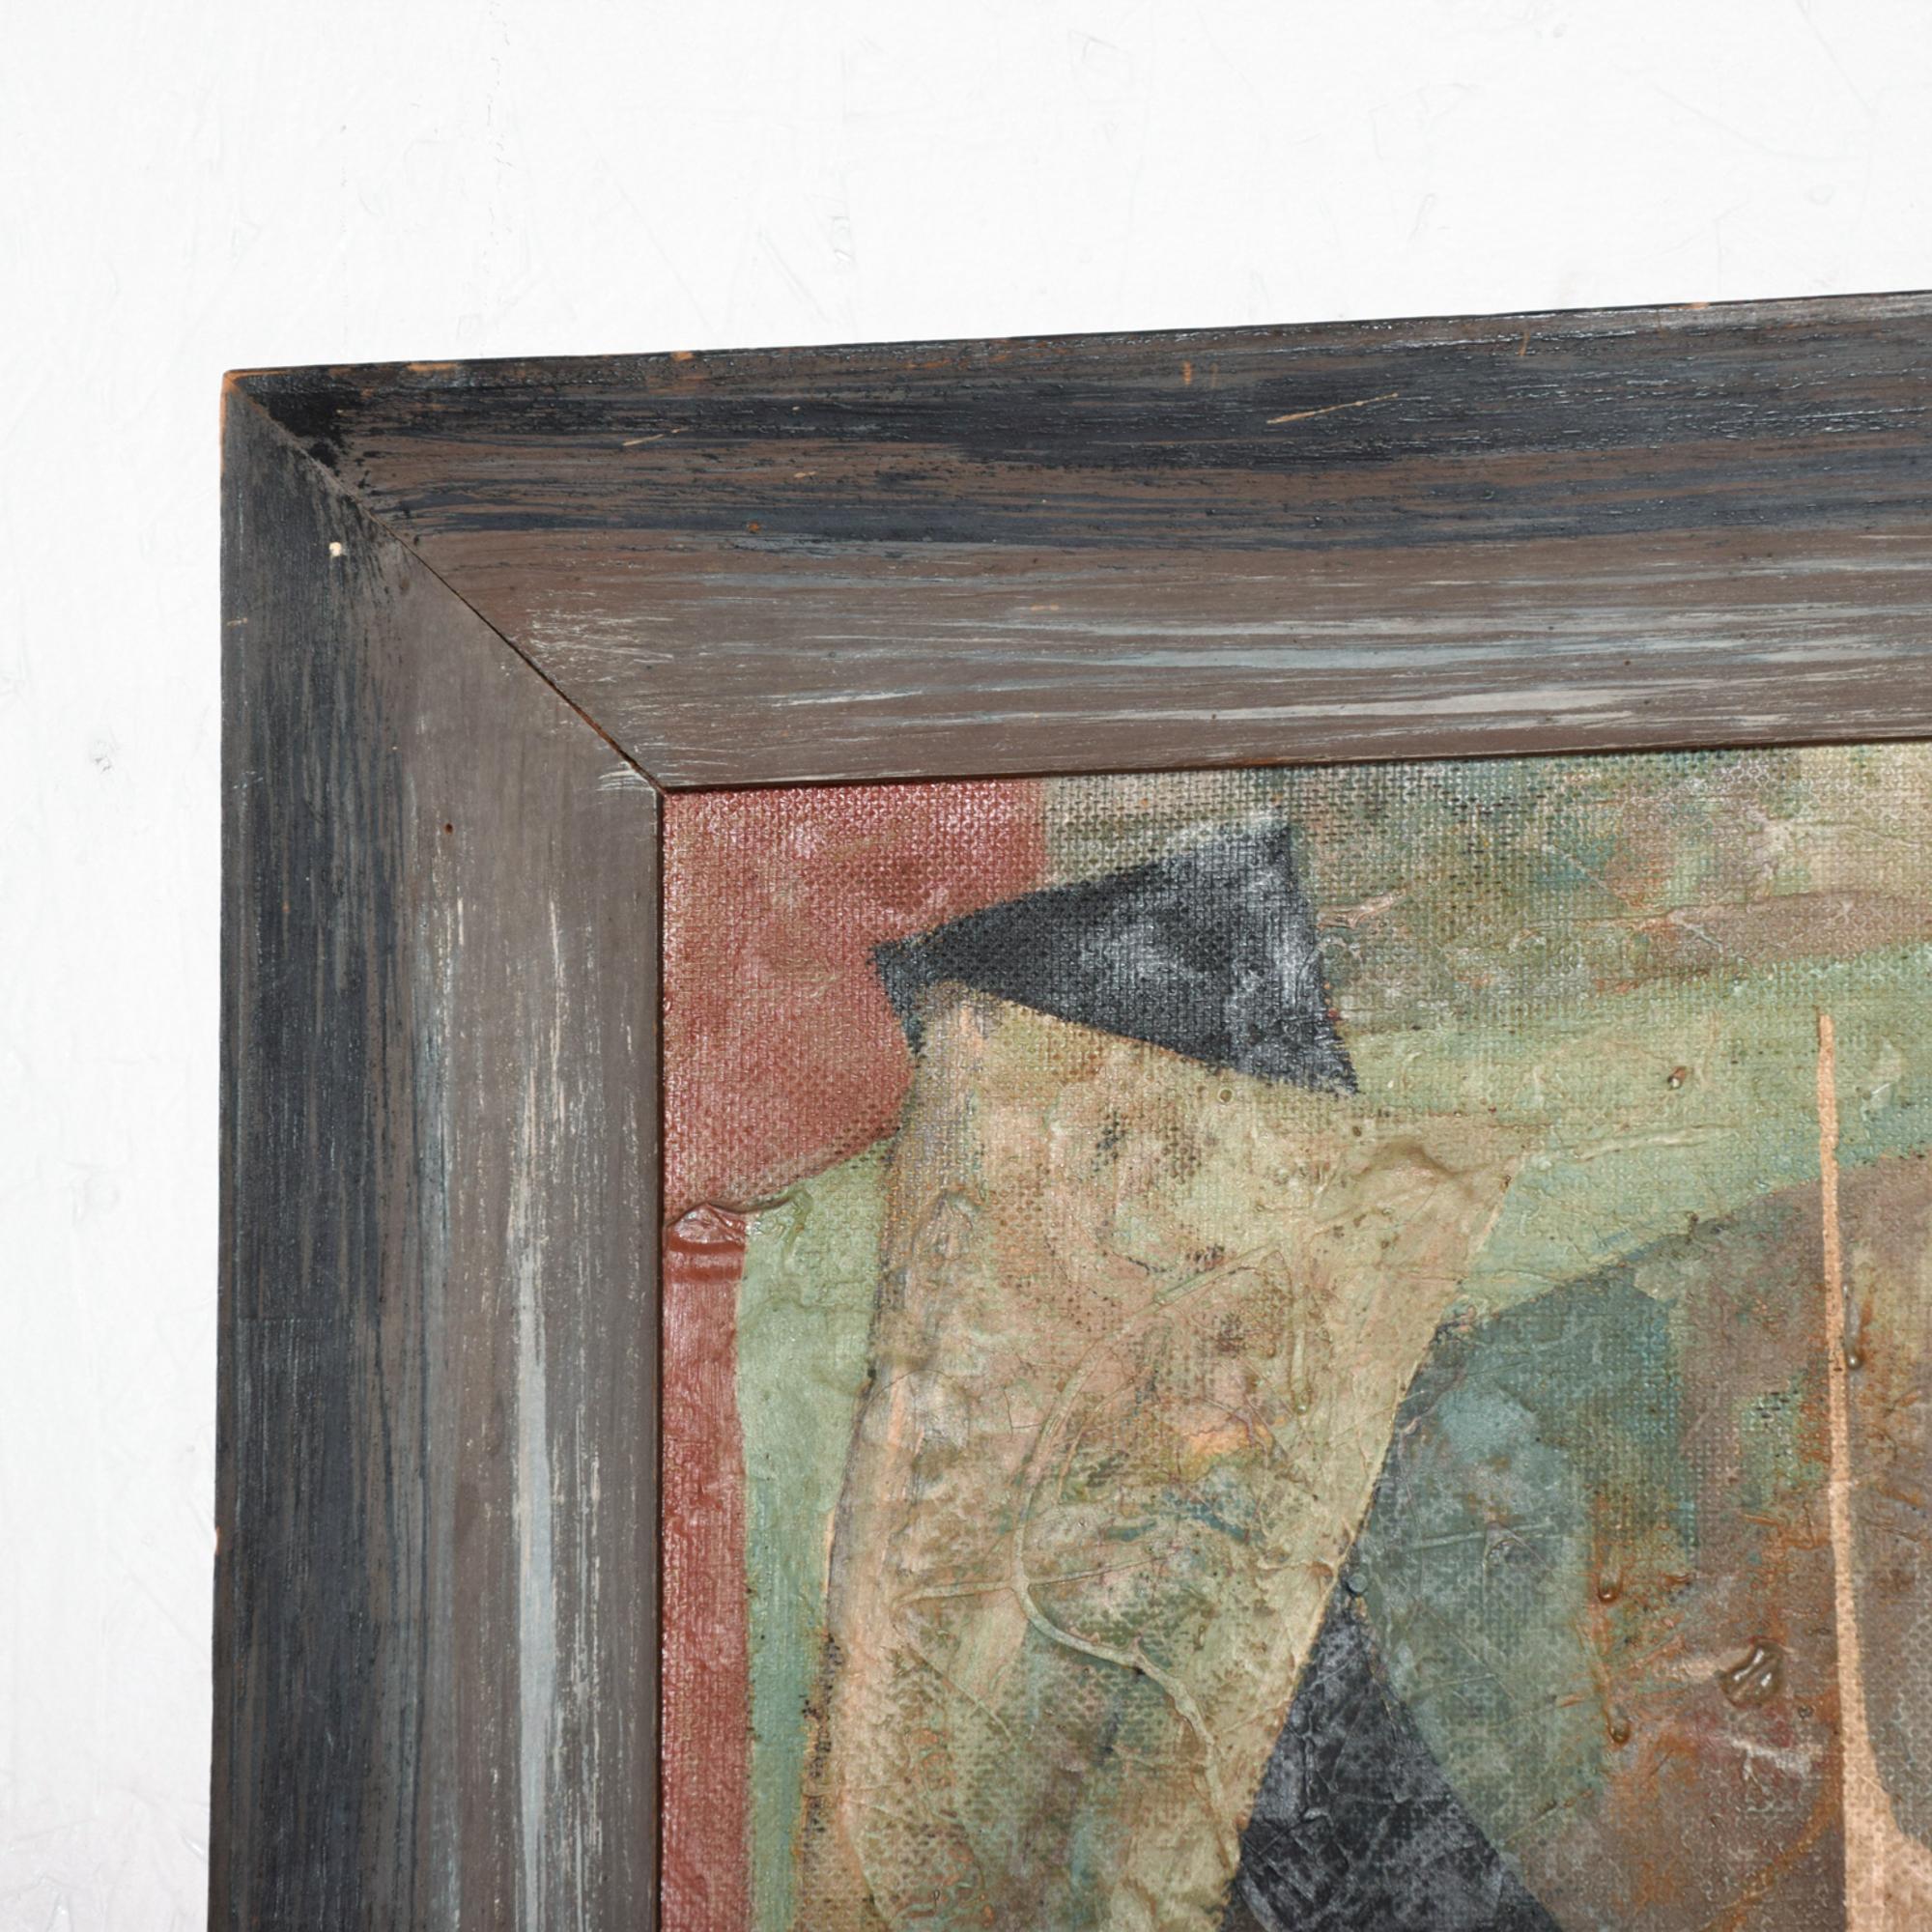 Art
Painting Oil on Masonite board signed Worthington. 1960s USA
Dark Mysterious Modern abstract composition.
Dimensions: 25.5W x 29.5 H 1 thick, Art 23 x 19.5
Original patinated wood frame.
Original vintage unrestored condition. Refer to